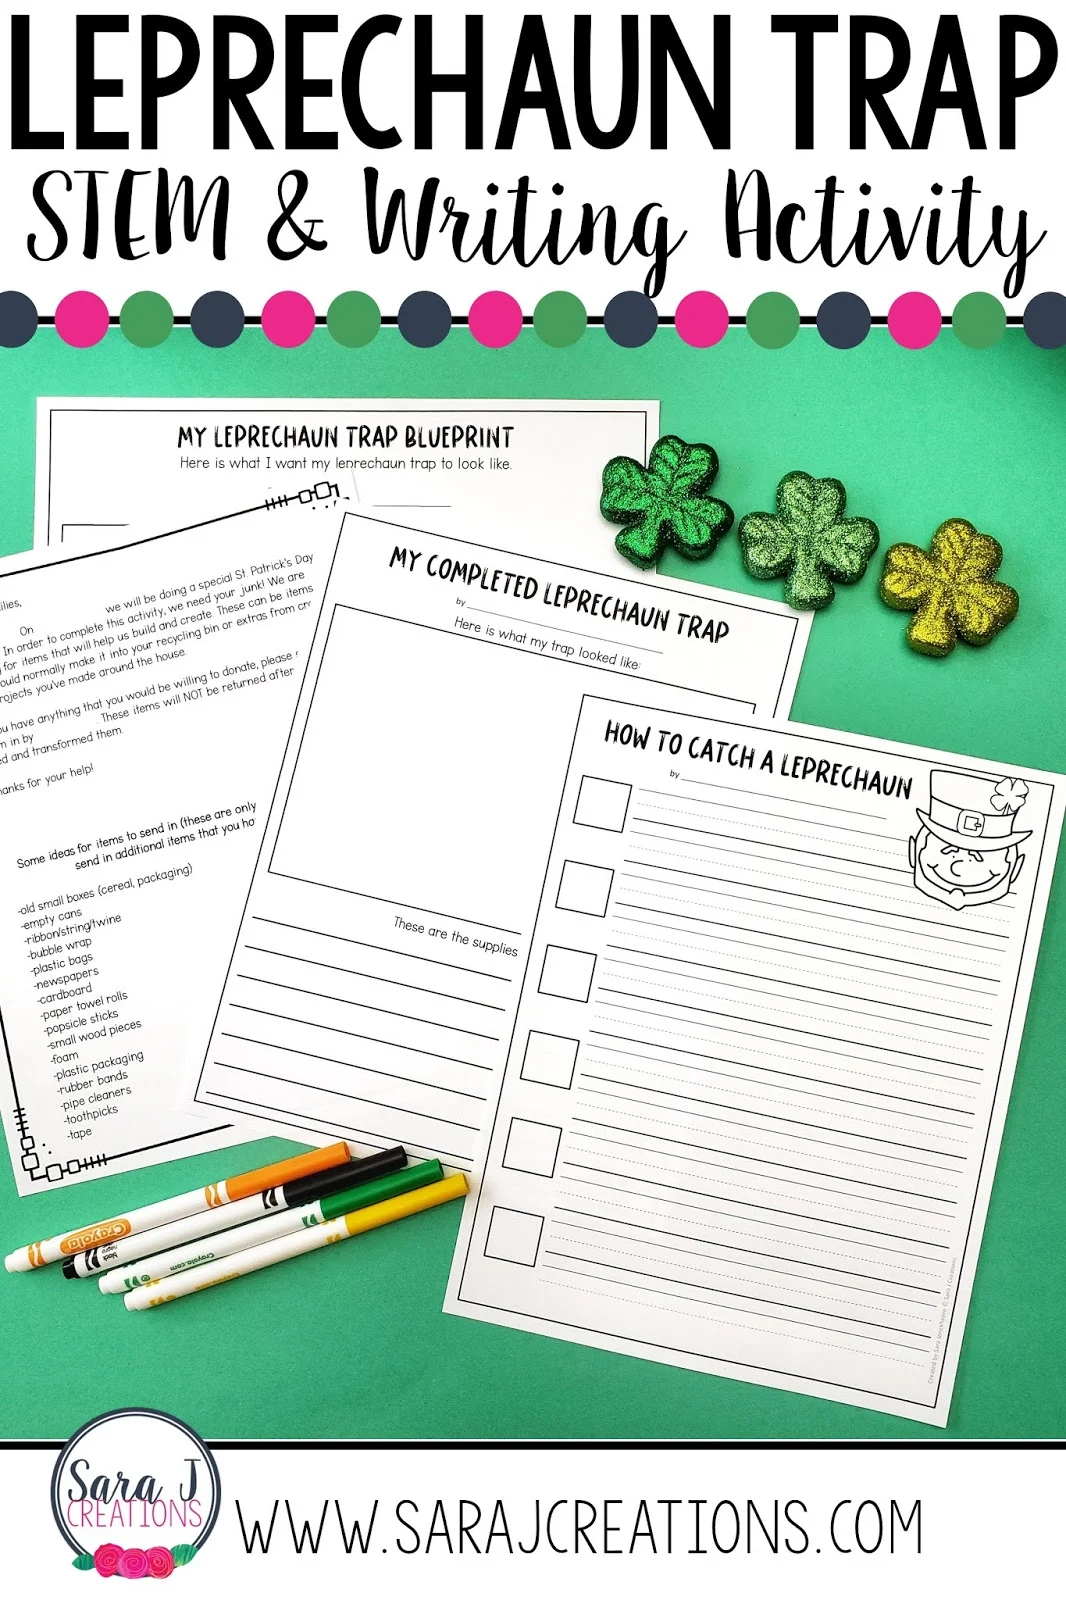 Check out this leprechaun trap making idea for kids. An easy to use project idea where students create a leprechaun trap out of recycled items and then write how to catch a leprechaun. Even includes a letter to parents to help gather supplies for building. So much St. Patrick's Day fun!